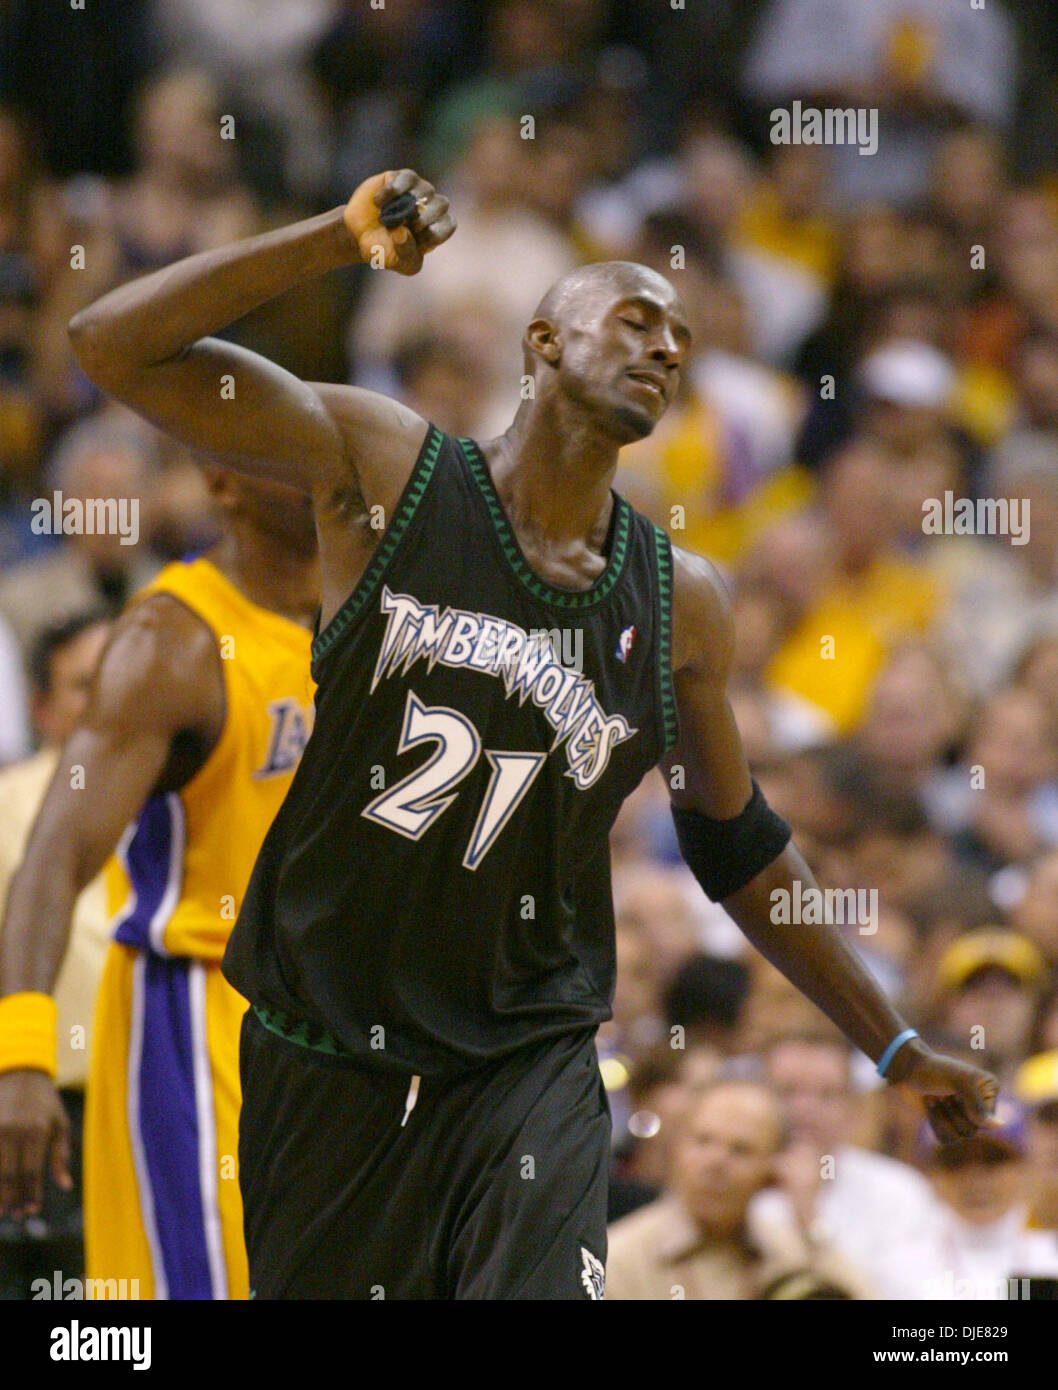 May 27, 2004; Los Angeles, CA, USA; Minnesota Timberwolves player KEVIN GARNETT (21) gets upset with a call by the referee during the fourth quarter of game 4 of the Western Conference Finals at the Staples Center. The Lakers defeated the Timberwolves 92 - 85. Stock Photo